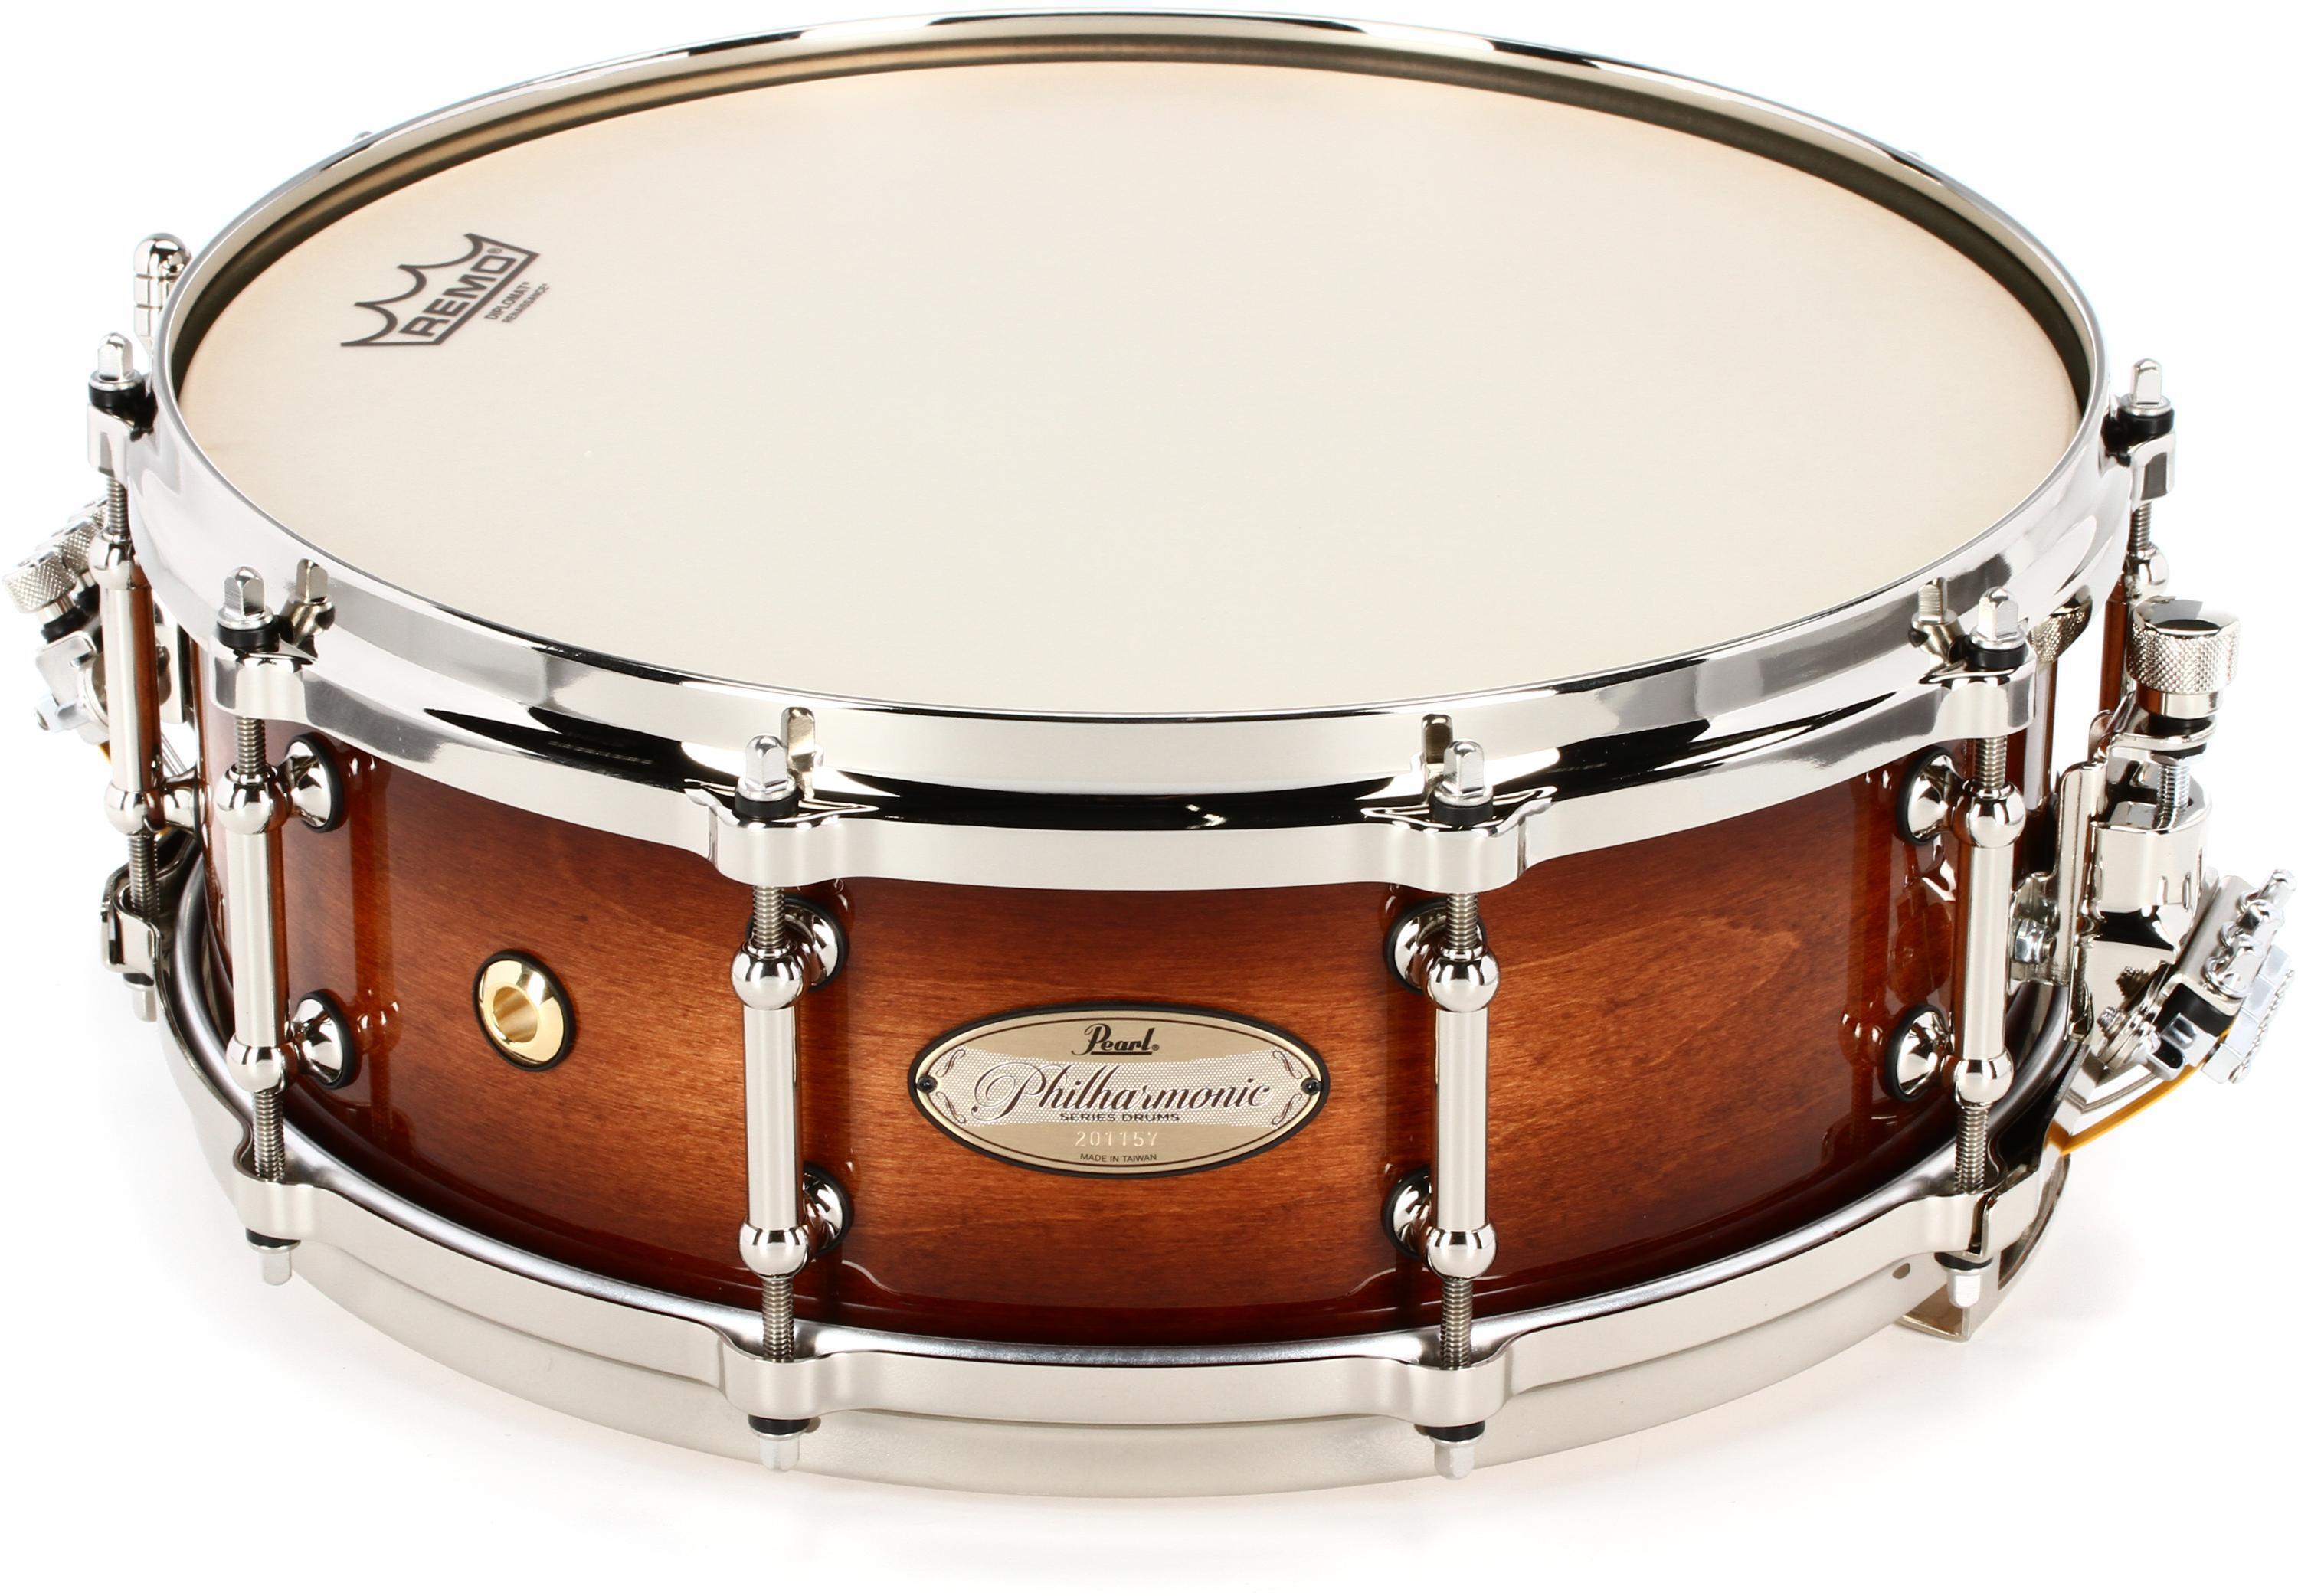 Pearl Pearl Philharmonic Concert Snare Drum in Maple High Gloss Walnut  14X5in